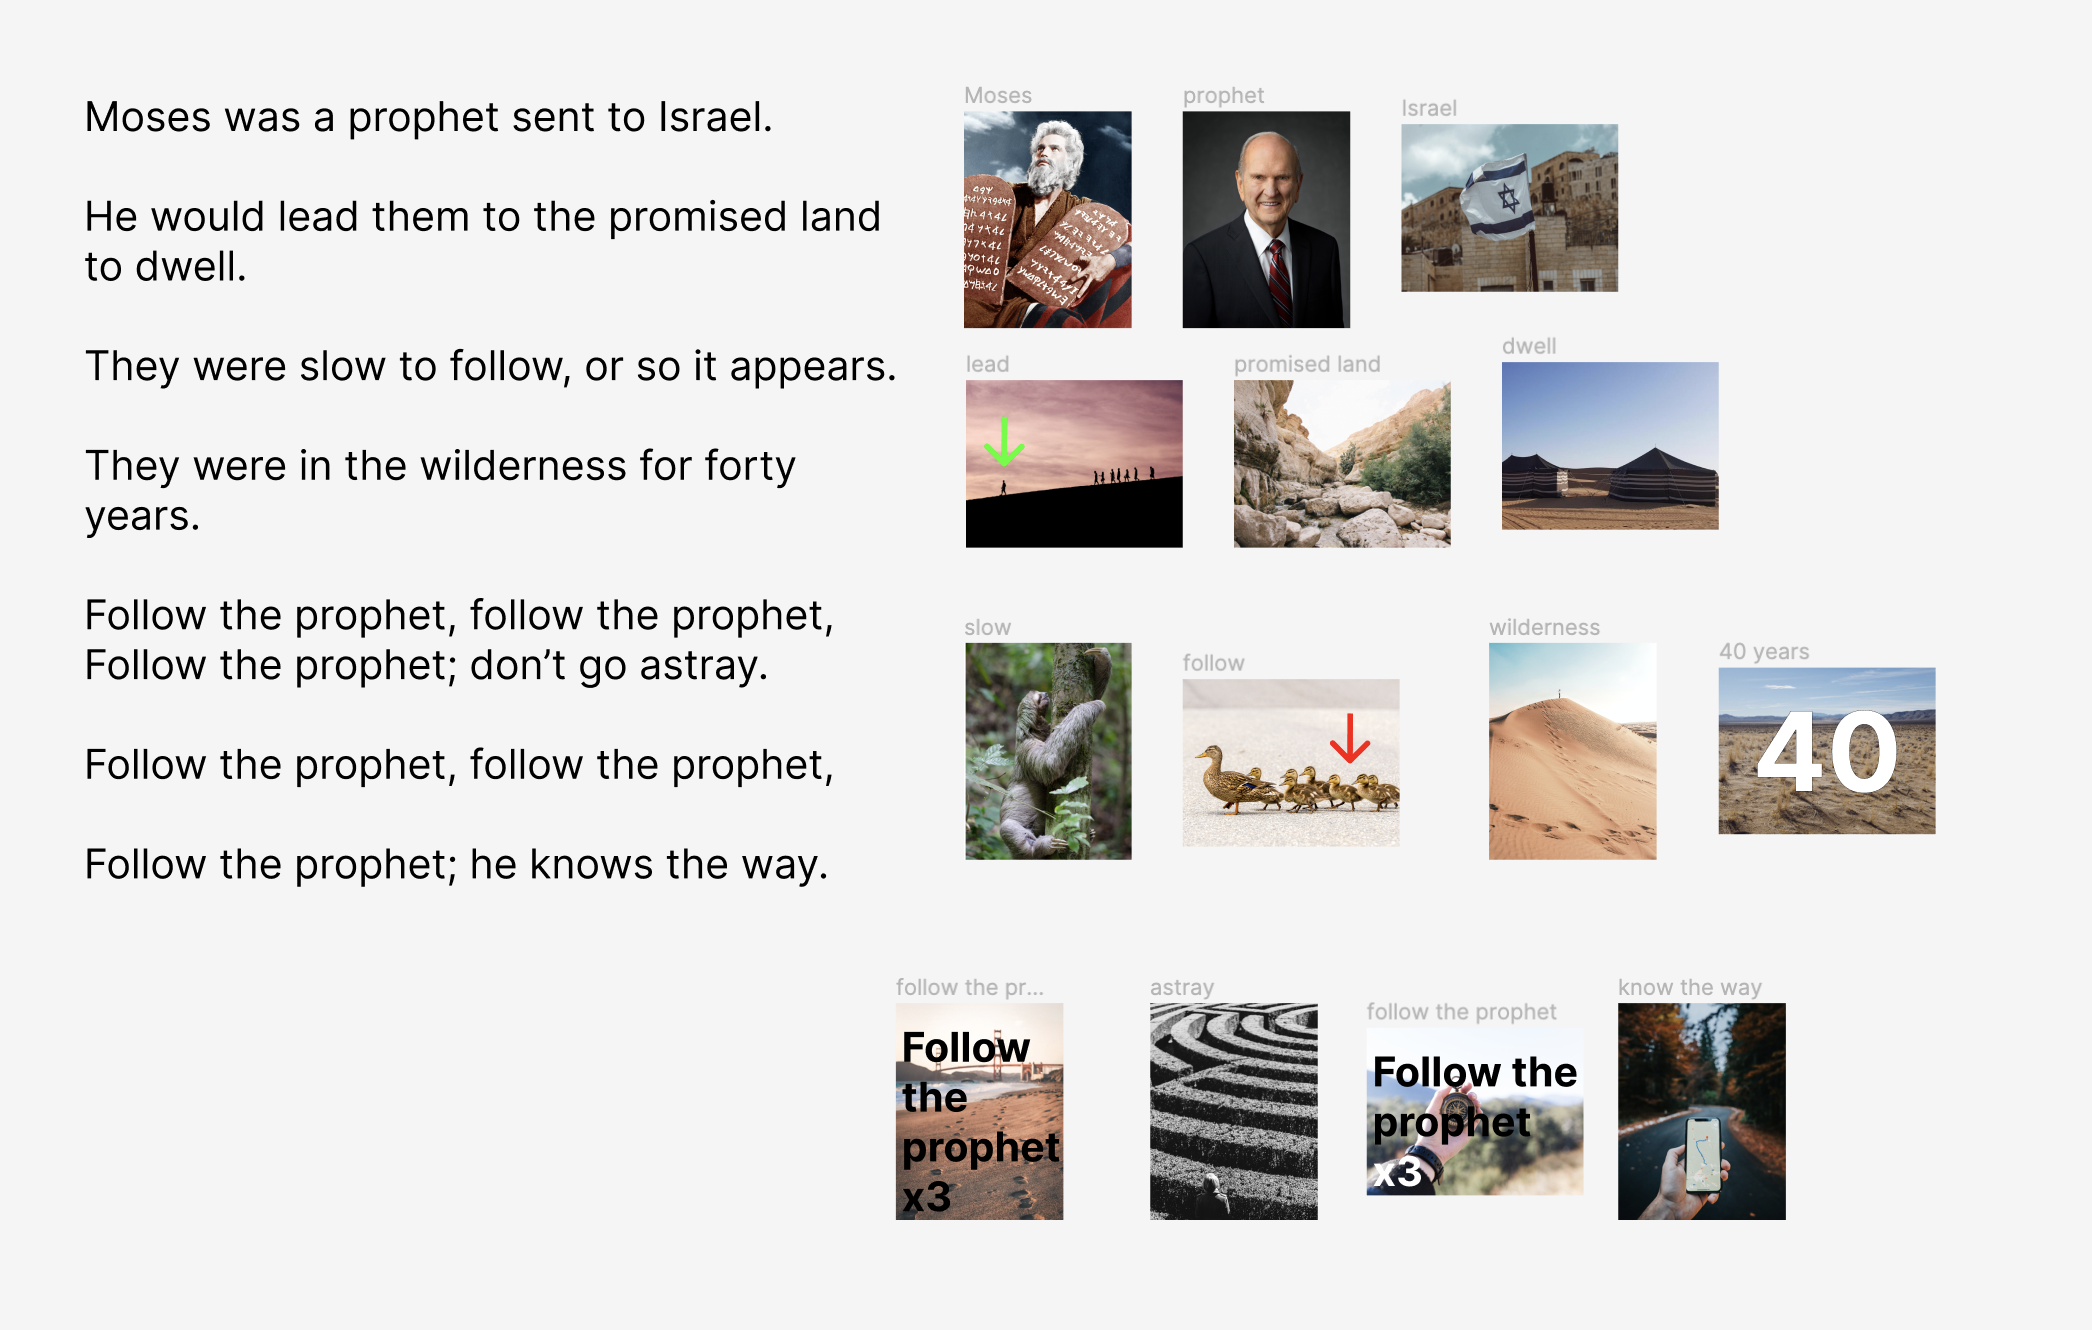 Free Printables  for Mixed up Picture Activity – Follow the Prophet, Moses verse